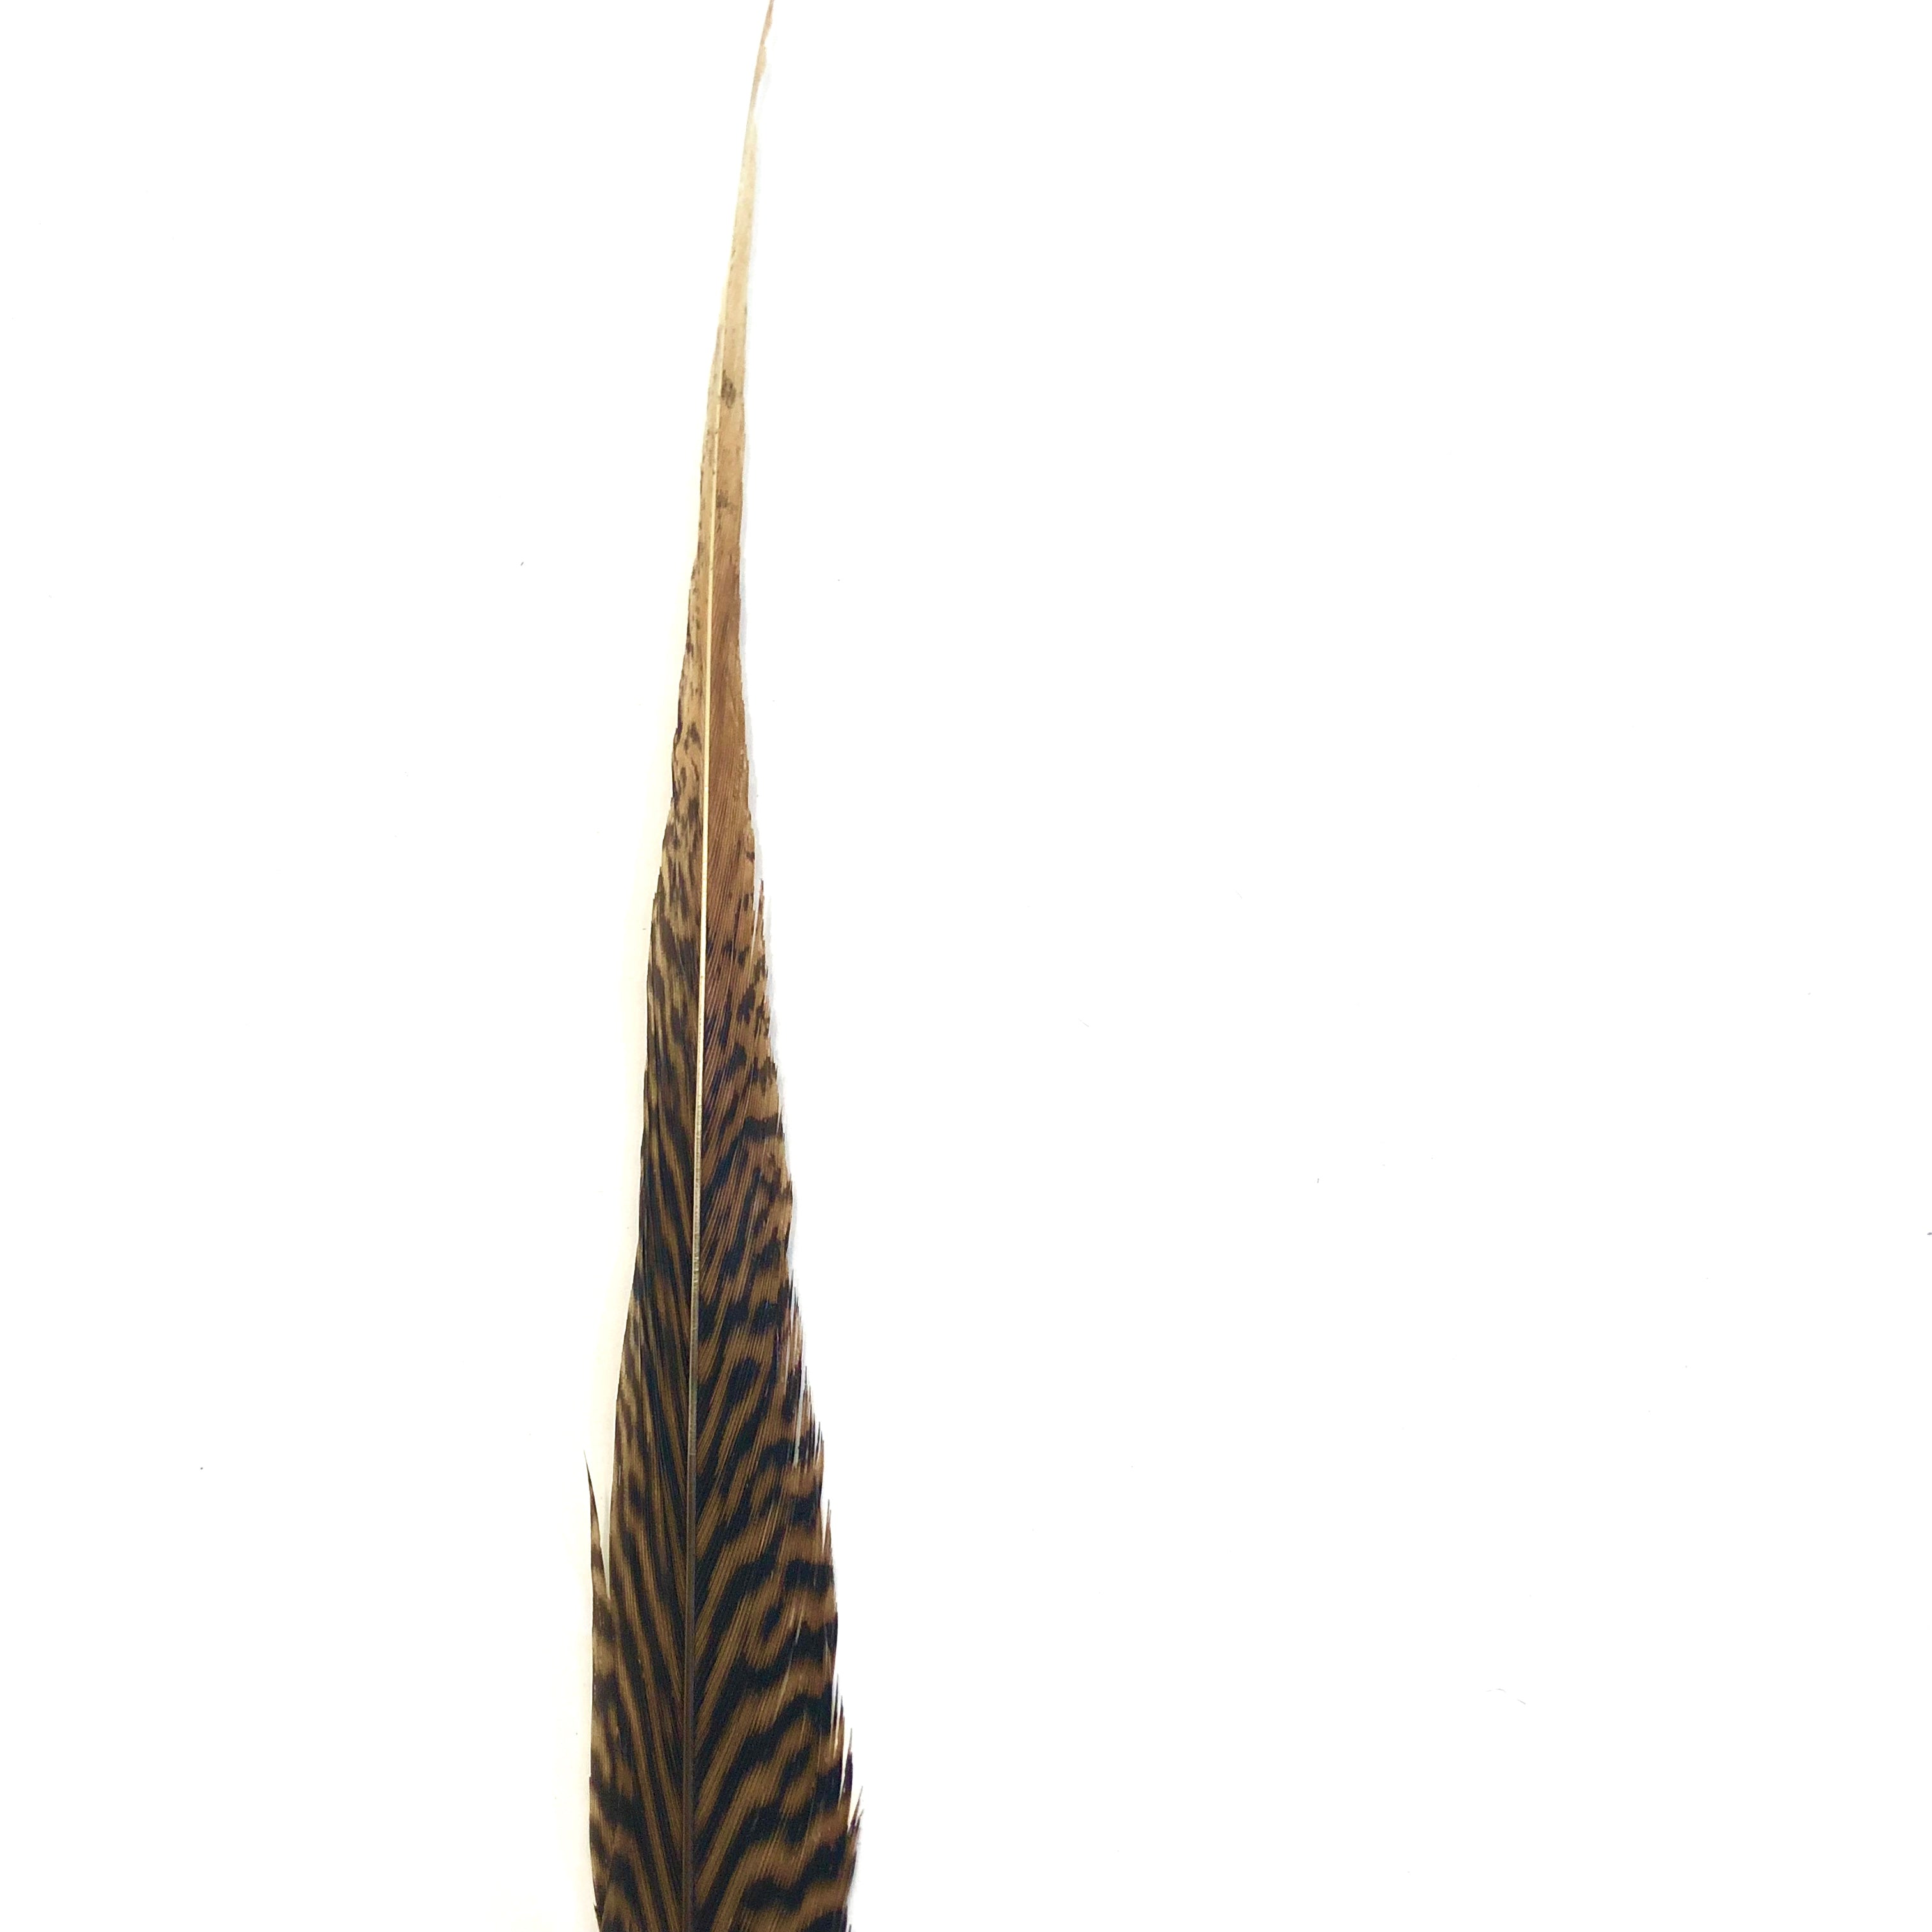 20" to 30" Golden Pheasant Side Tail Feather - Natural